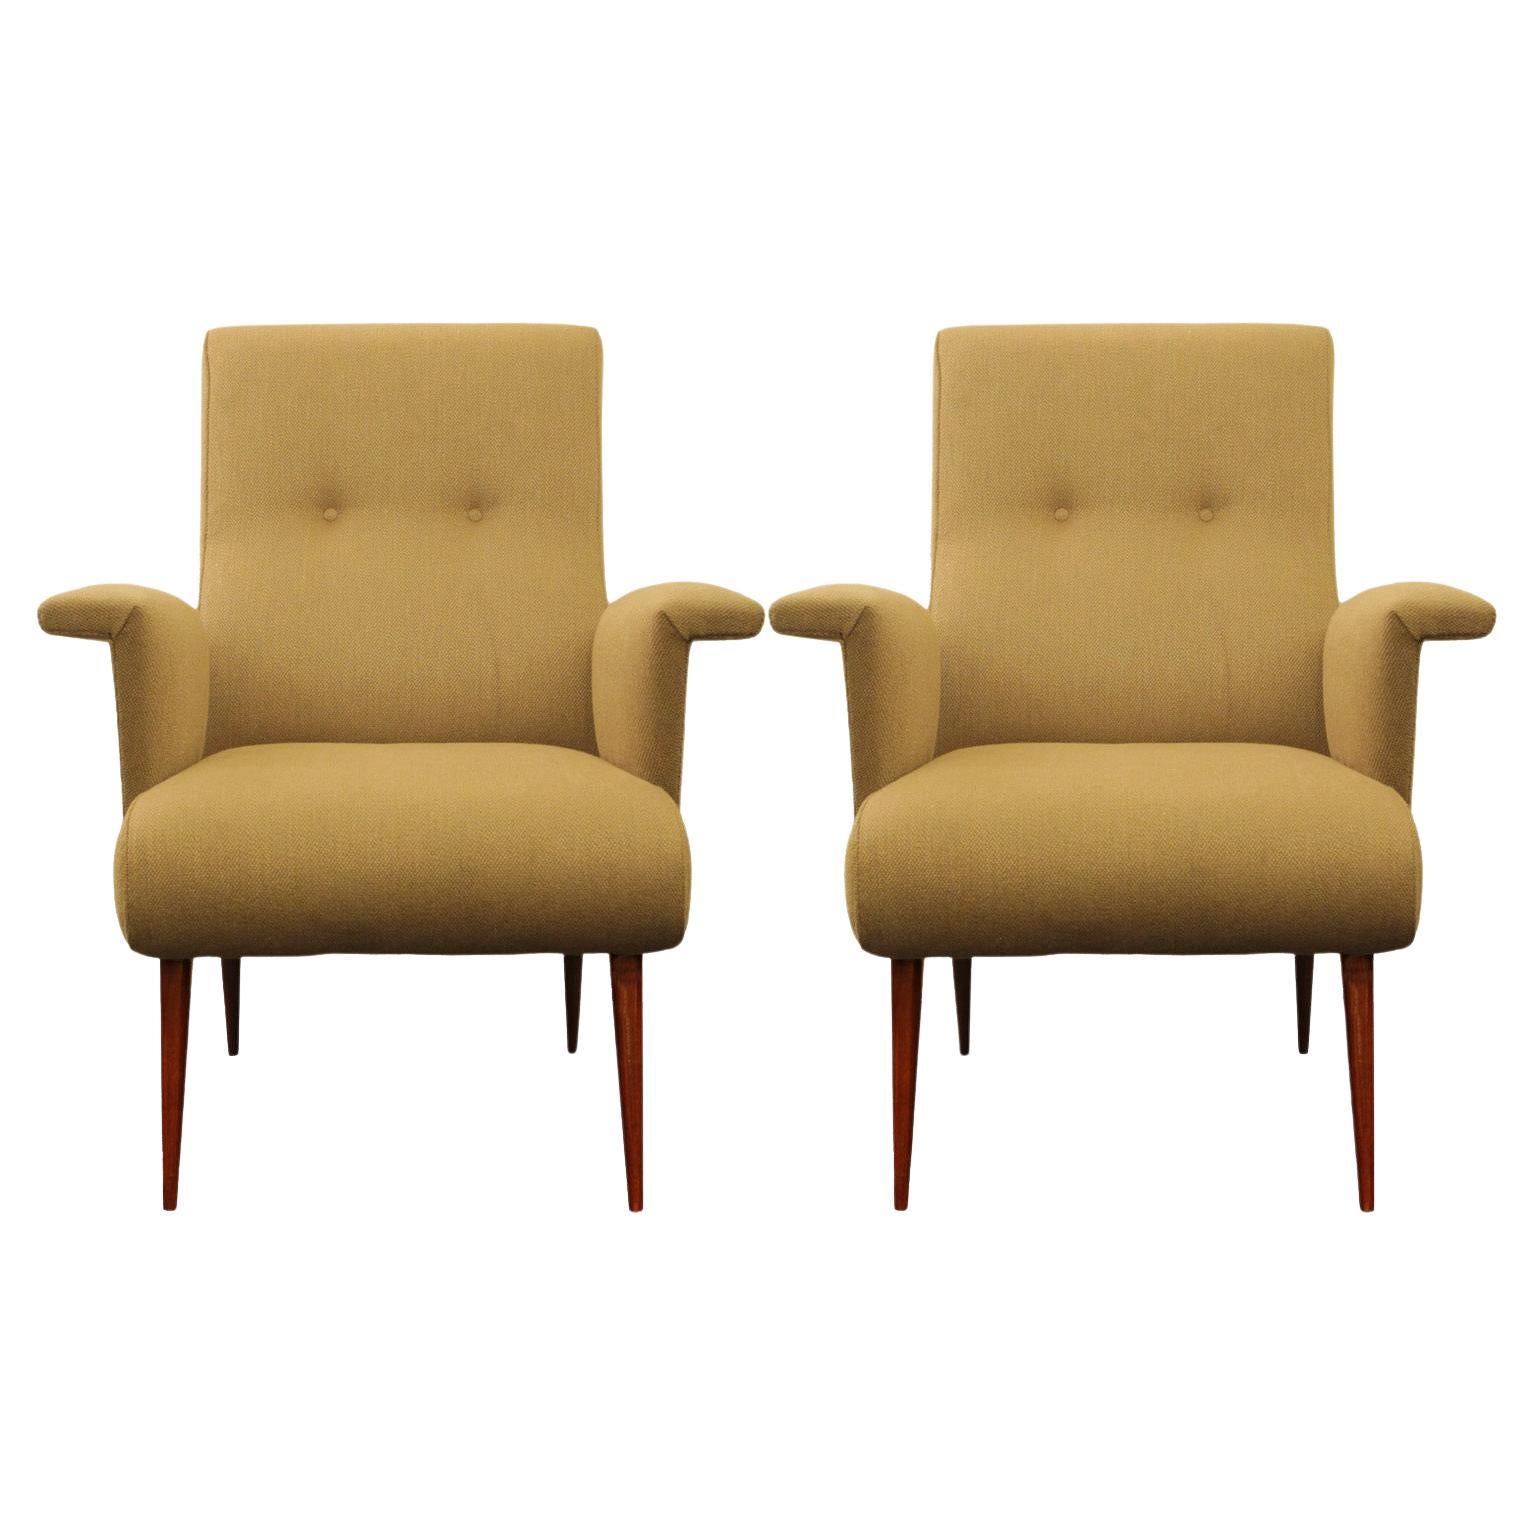 Chic Pair of Venfield "Sparrow" Chairs For Sale